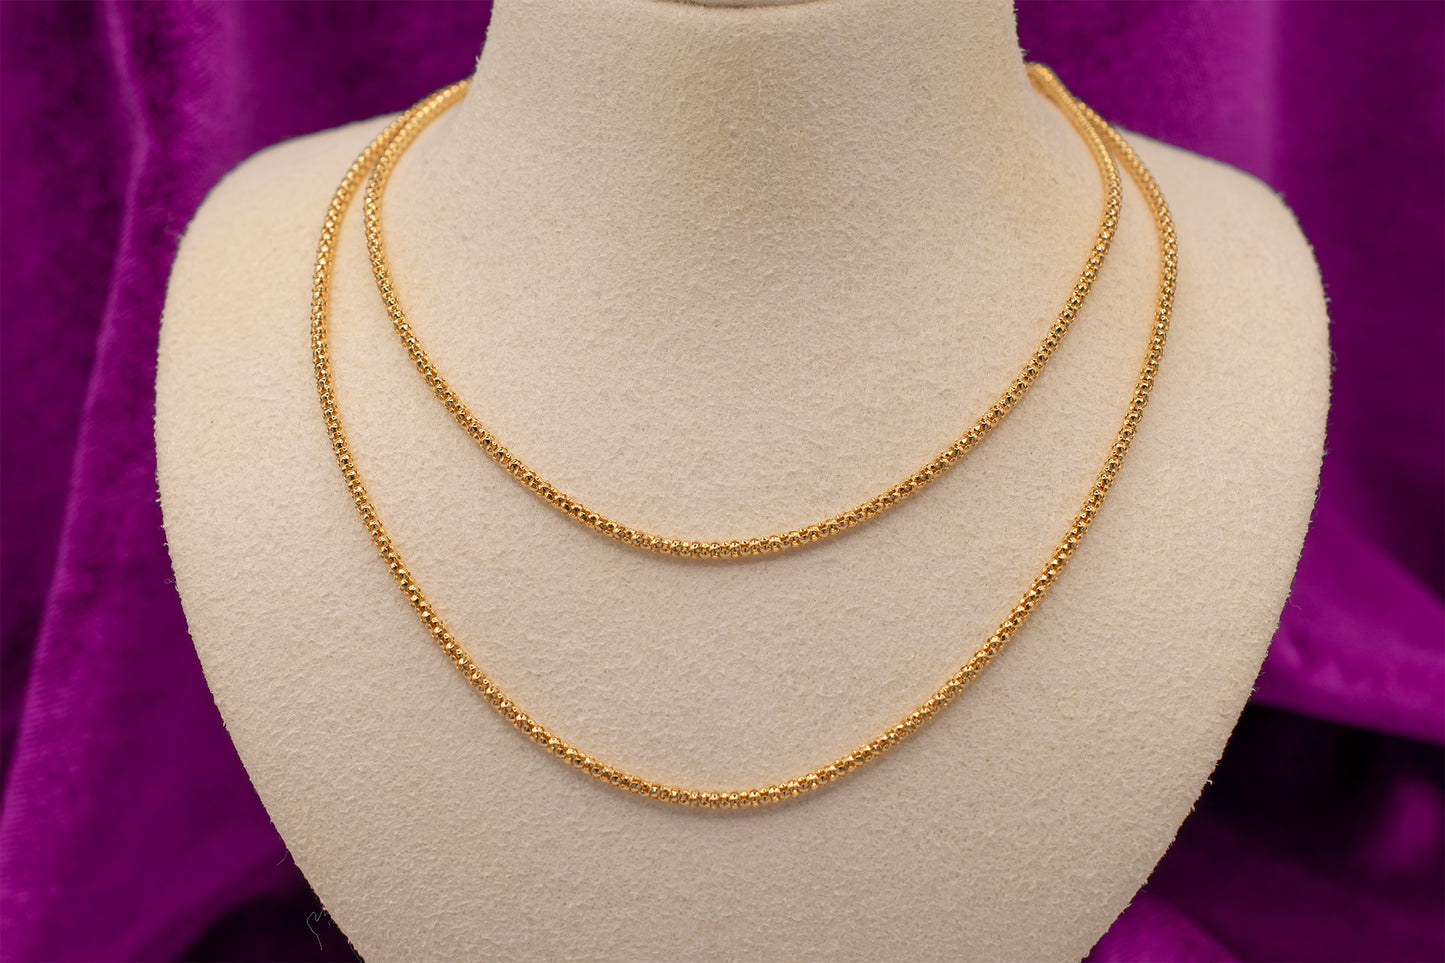 Vintage 18K Yellow Gold Popcorn Style Long Chain Necklace 22.5 Inches